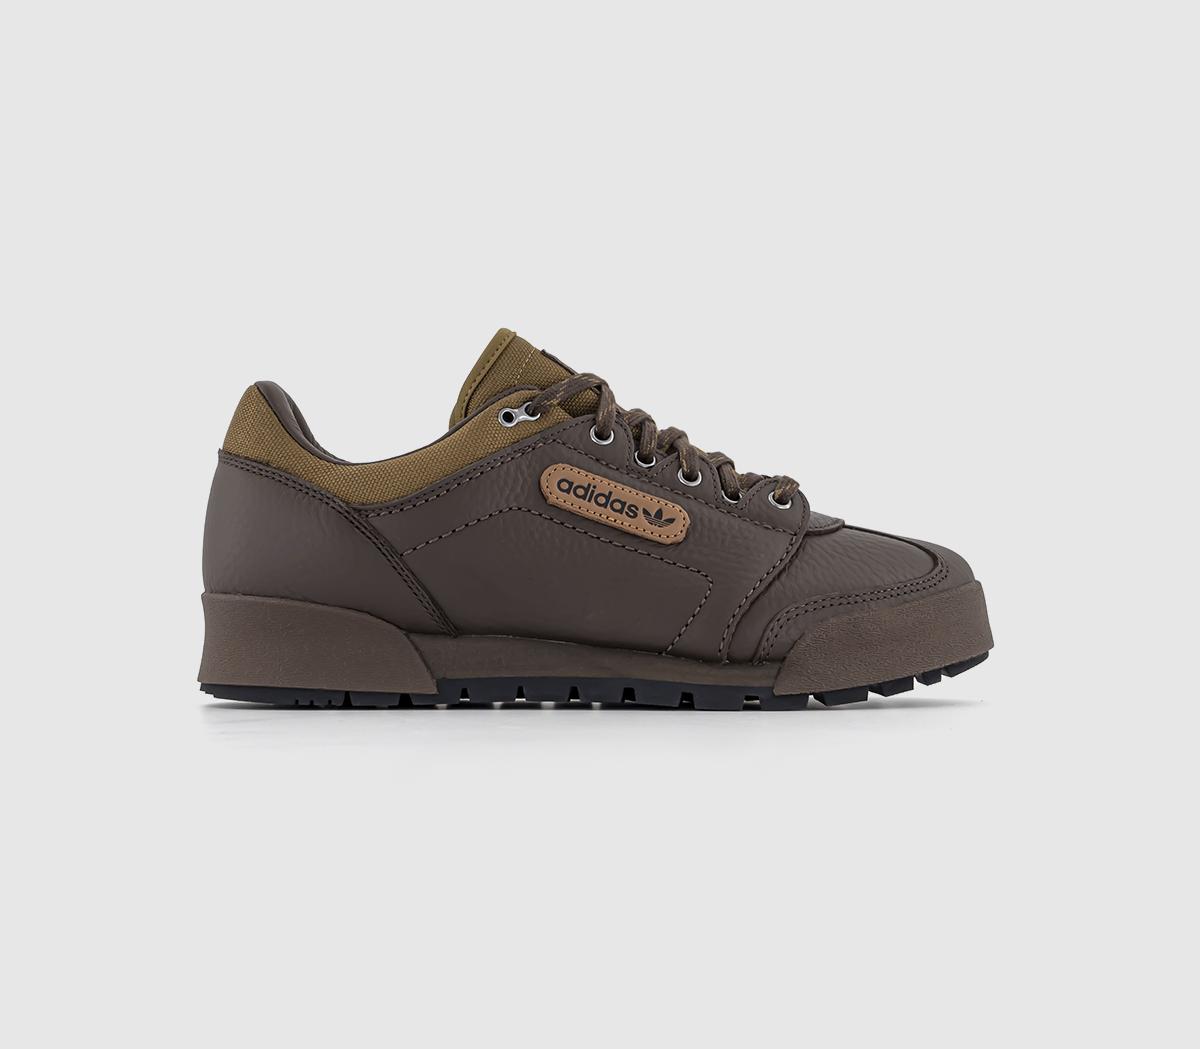 adidas ConsortiumInverness SPZL TrainersBrown Brown Oxide